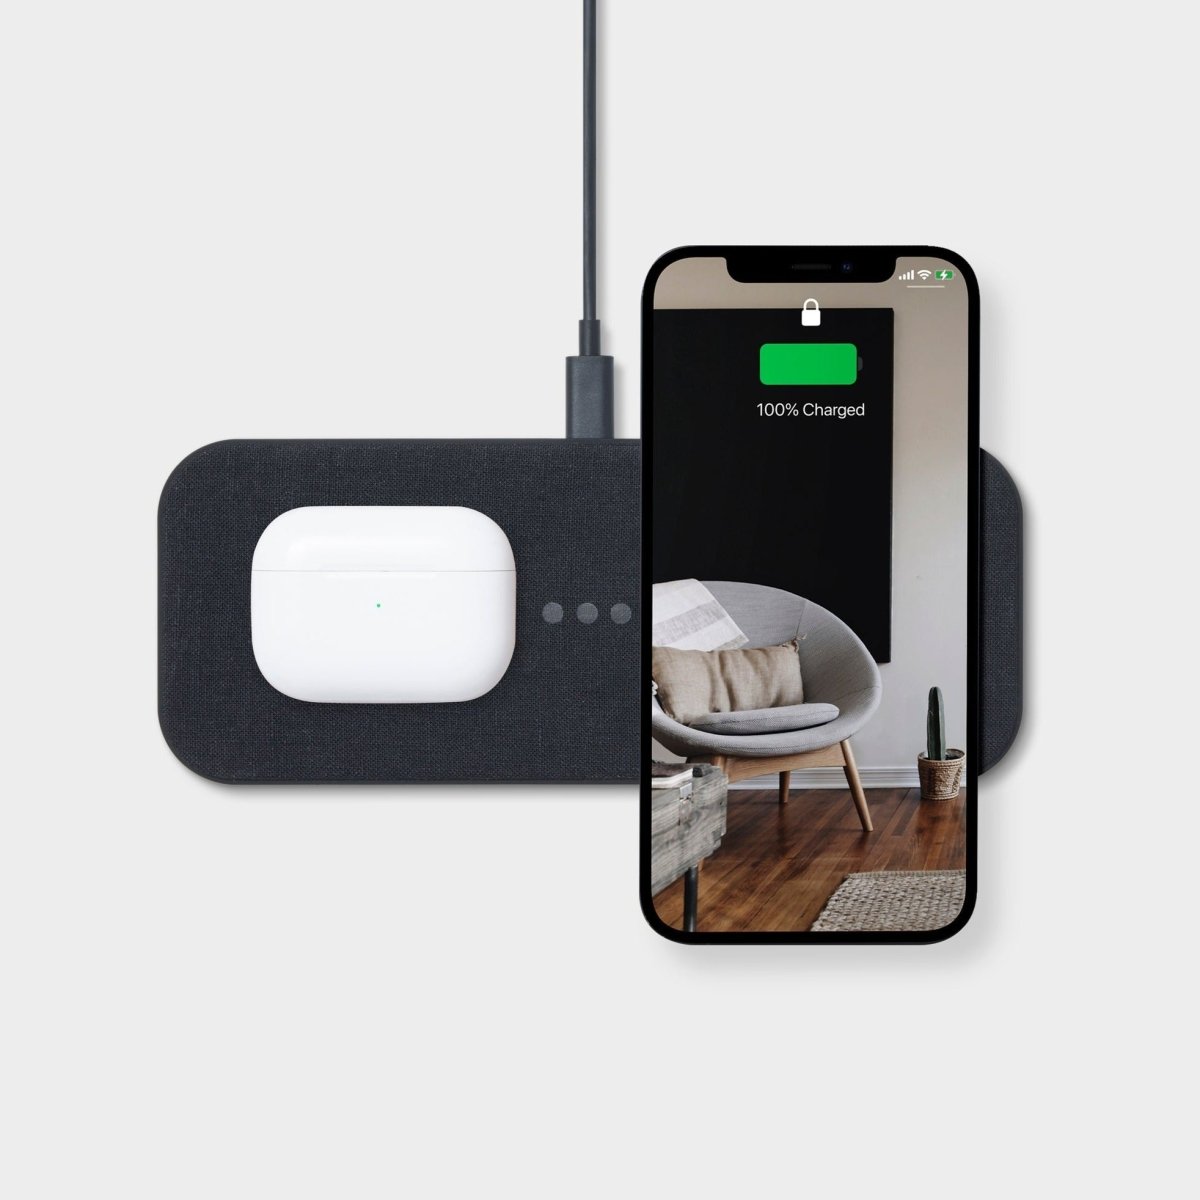 Courant Catch: 2 Essentials Multi Device Wireless Charger in Belgian Linen - lily & onyx